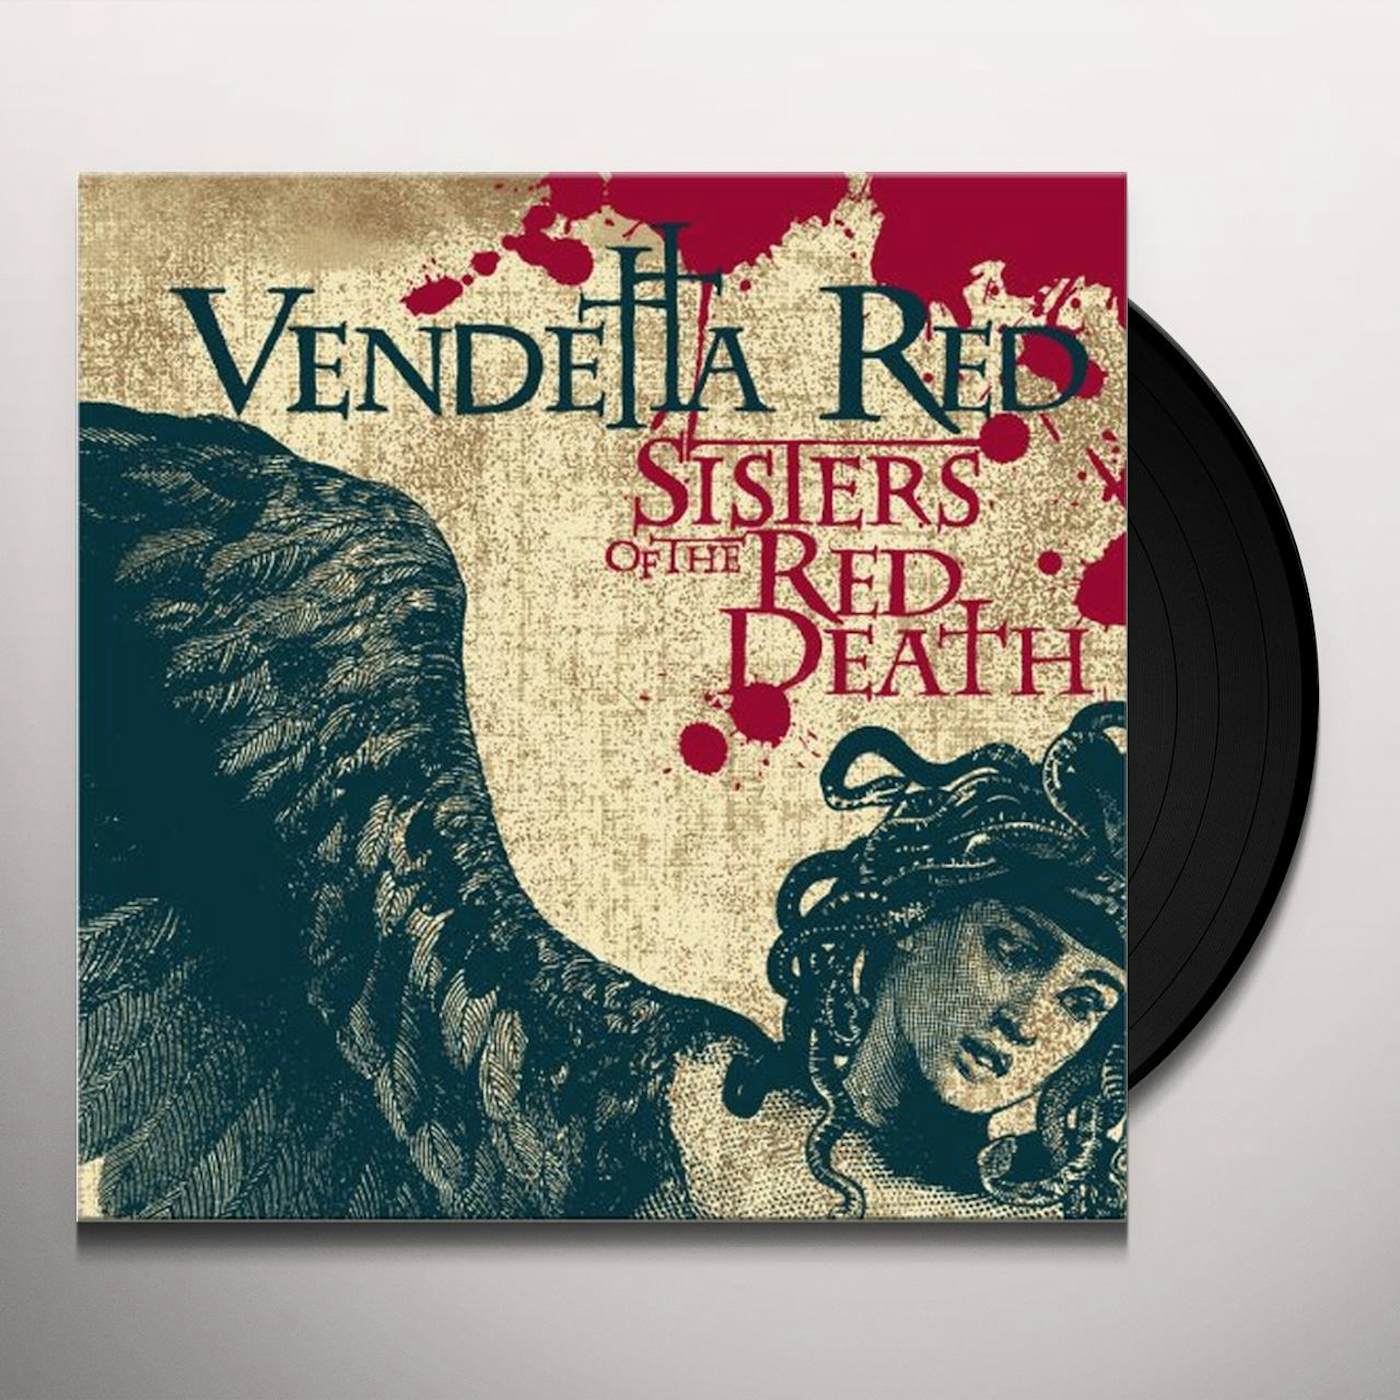 Vendetta Red Sisters of the Red Death Vinyl Record